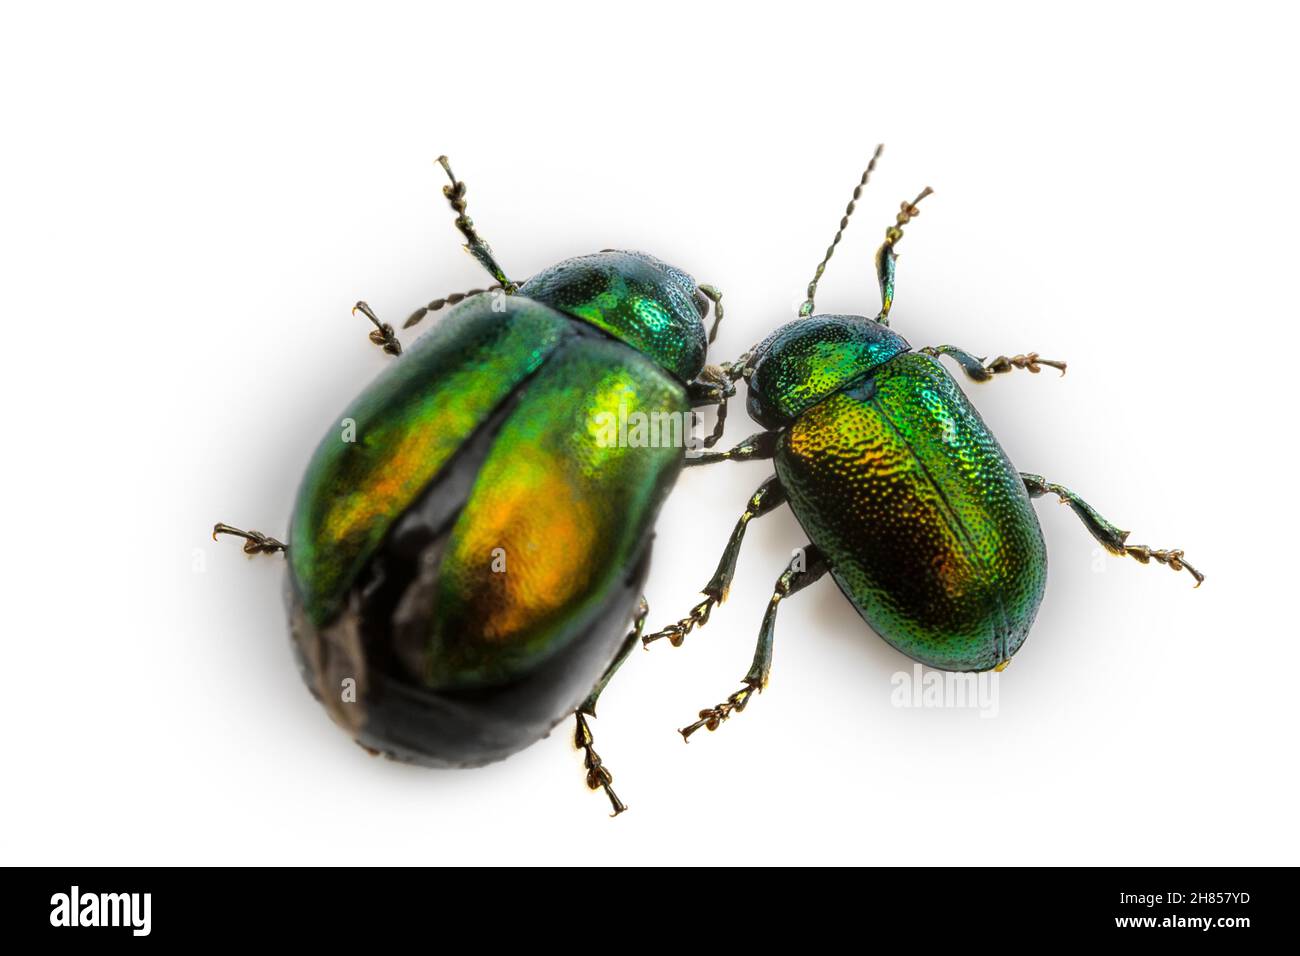 Defoliator, Tansy Beetle (Chrysolina graminis) feeds on the leaves of plants, invasive species. breeding season, left female before laying eggs. Insec Stock Photo